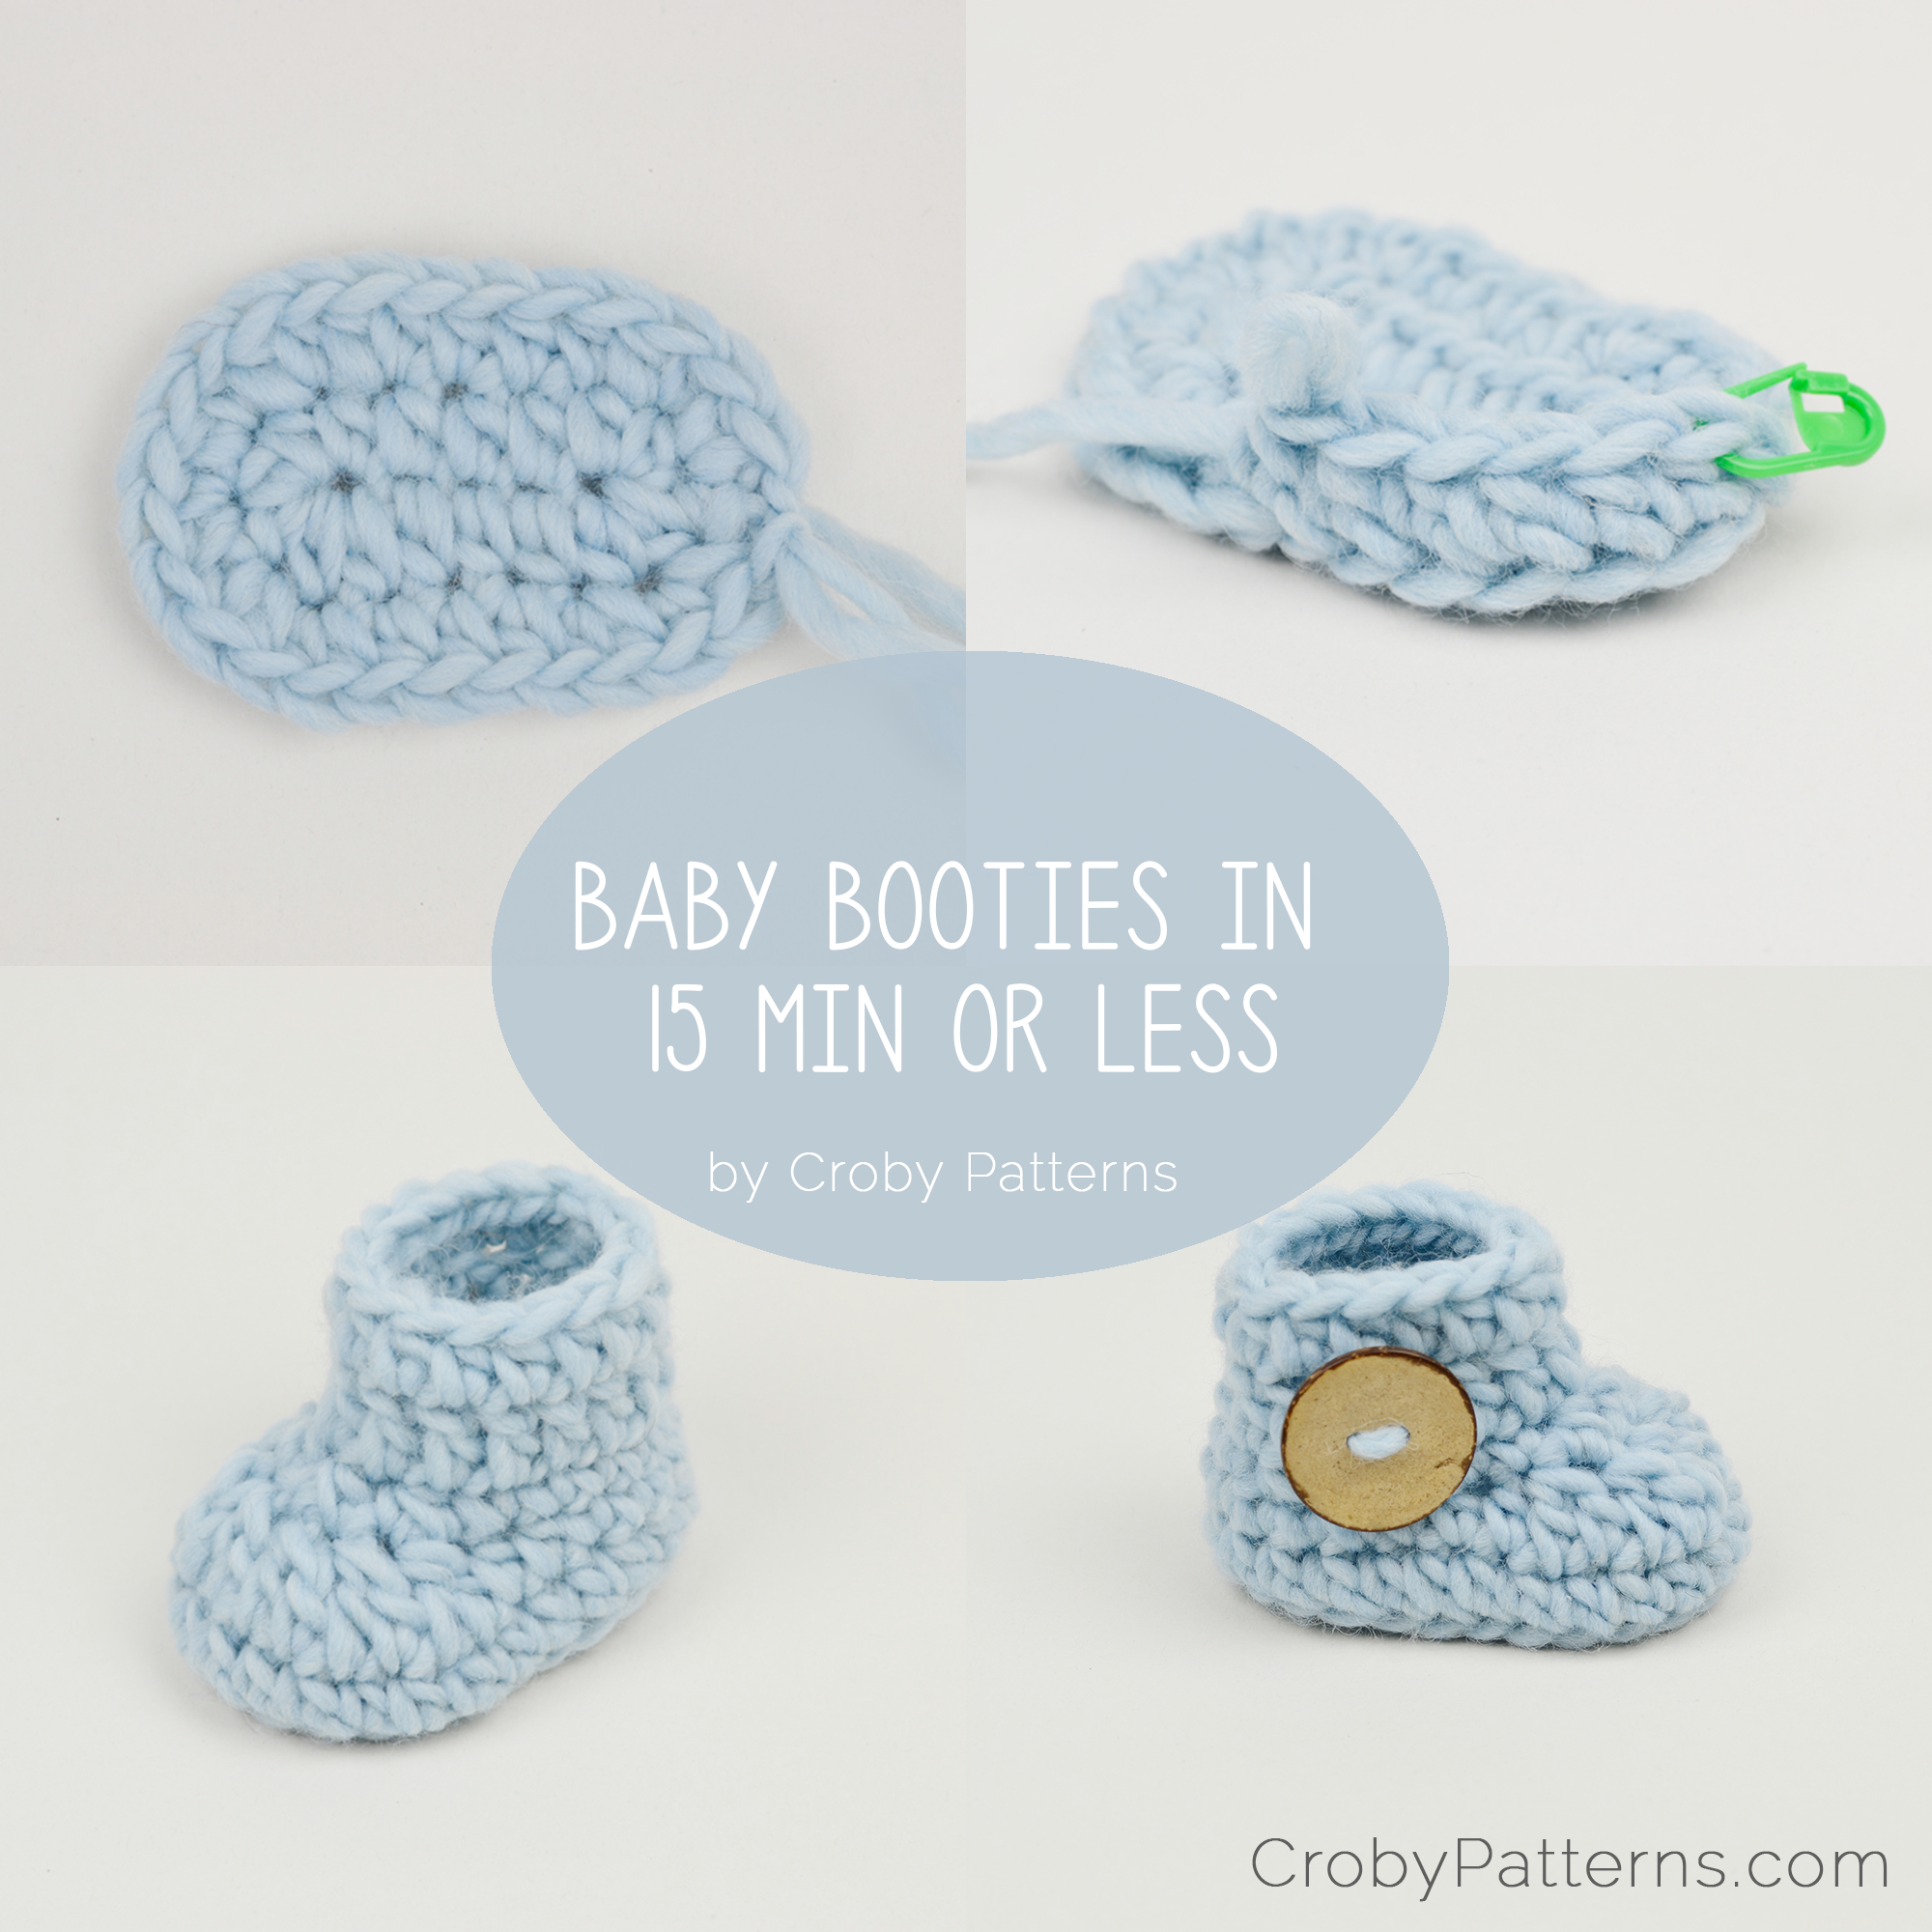 Crochet Pattern For Baby Booties Crochet Ba Booties In 15 Minutes Or Less Cro Patterns